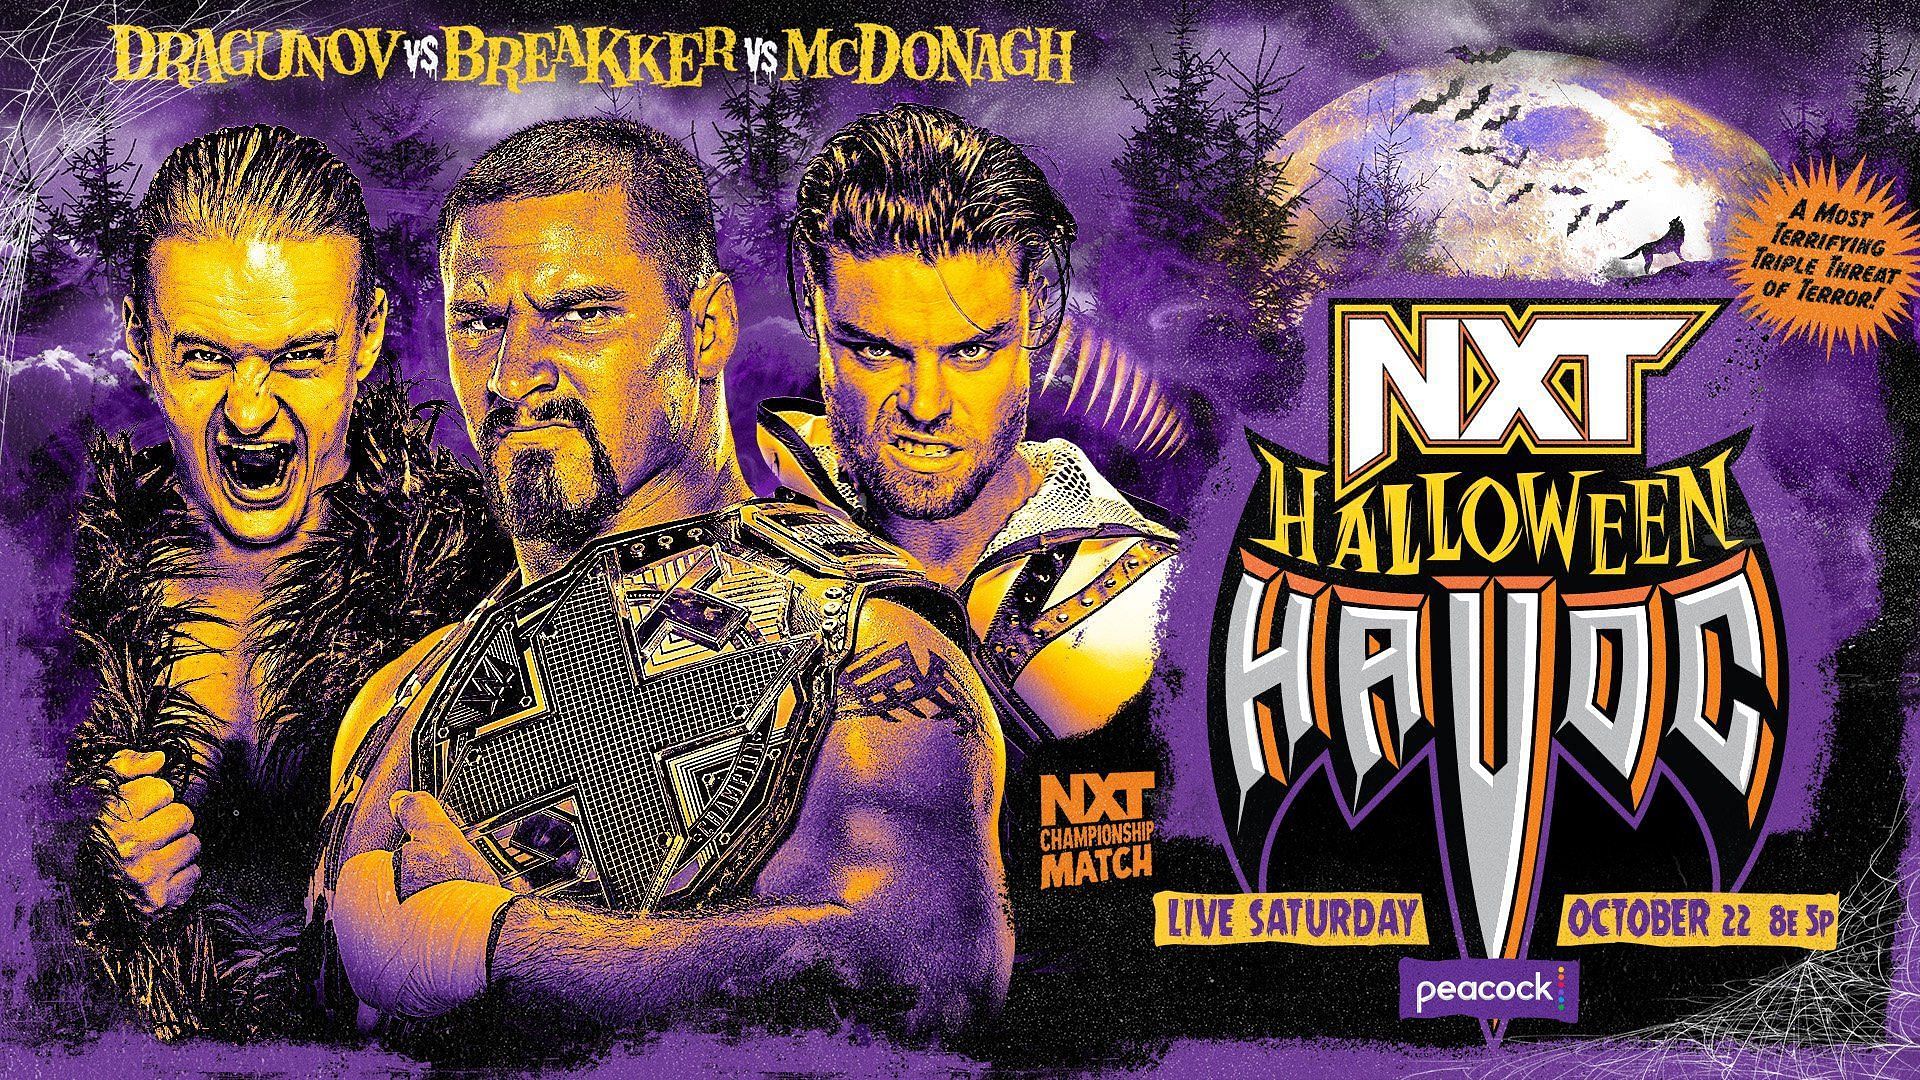 NXT seems to be eager to celebrate Halloween in style